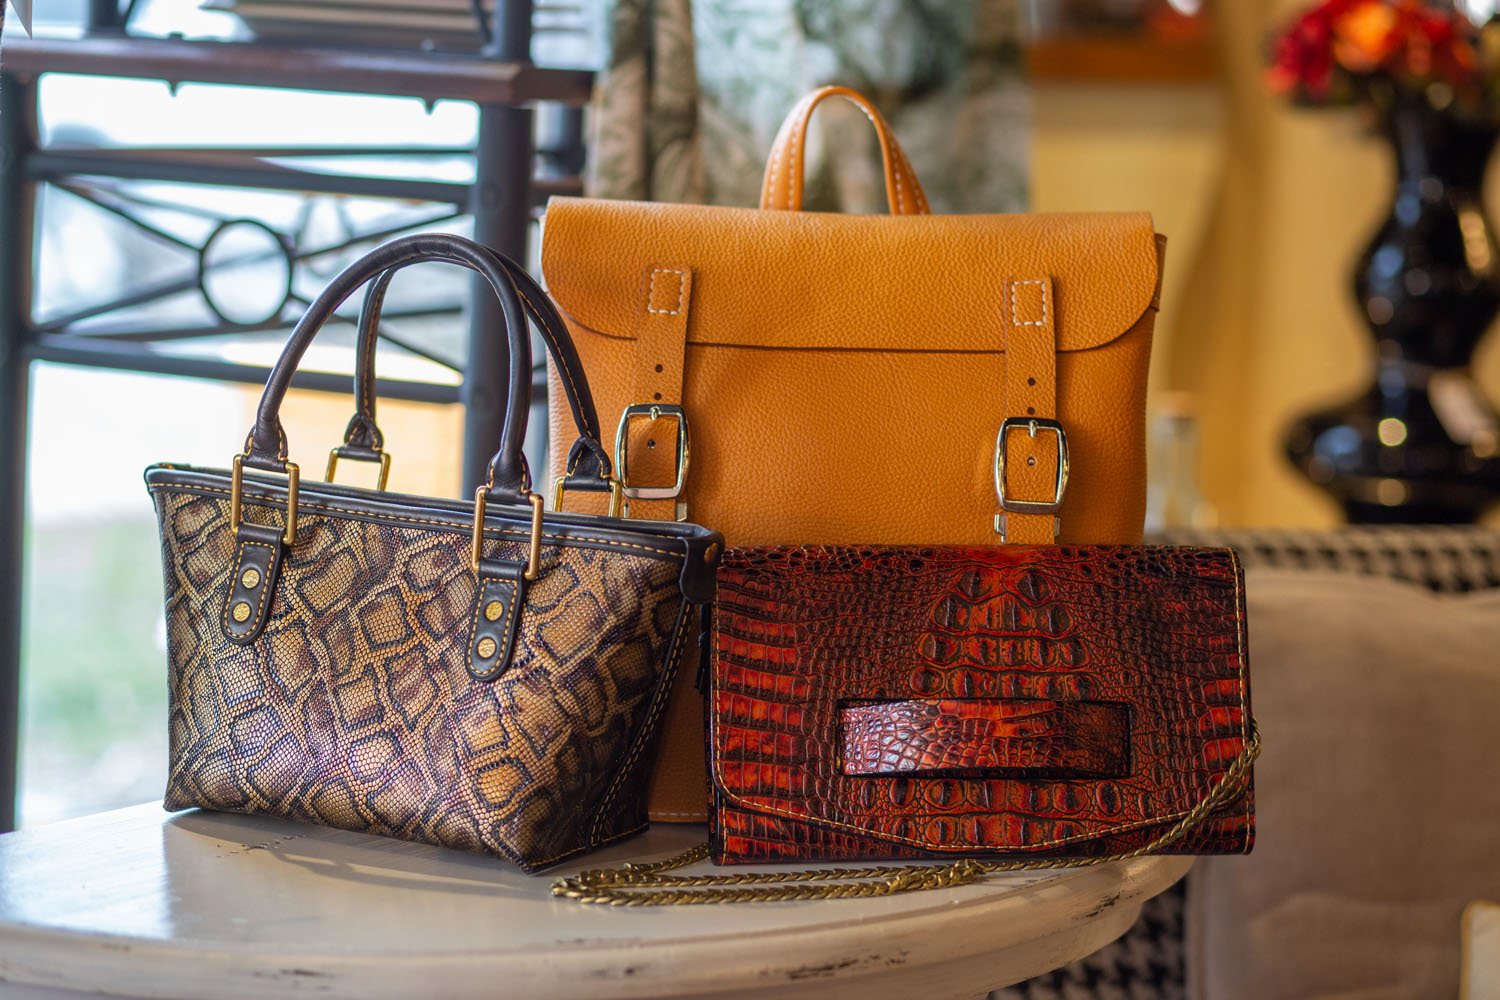 Leather for purses and bags is locally sourced.